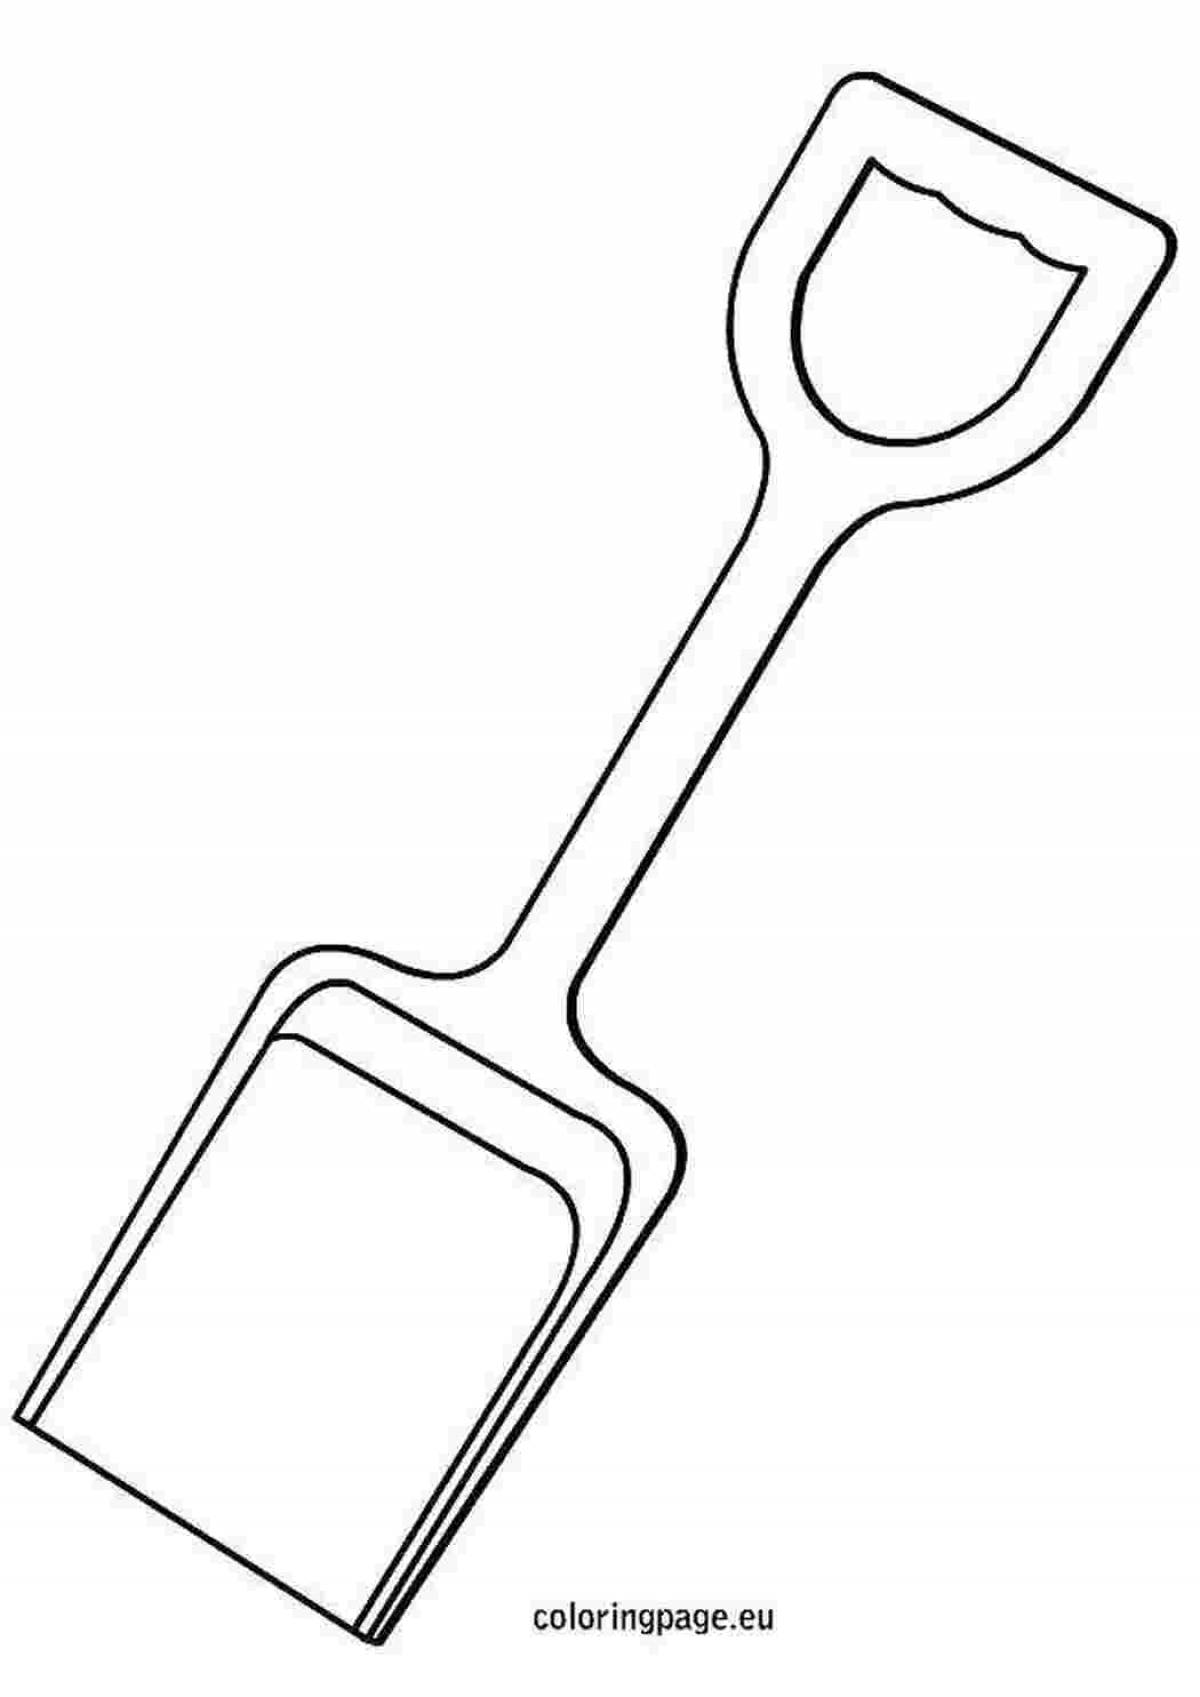 Shimmering spatula coloring page